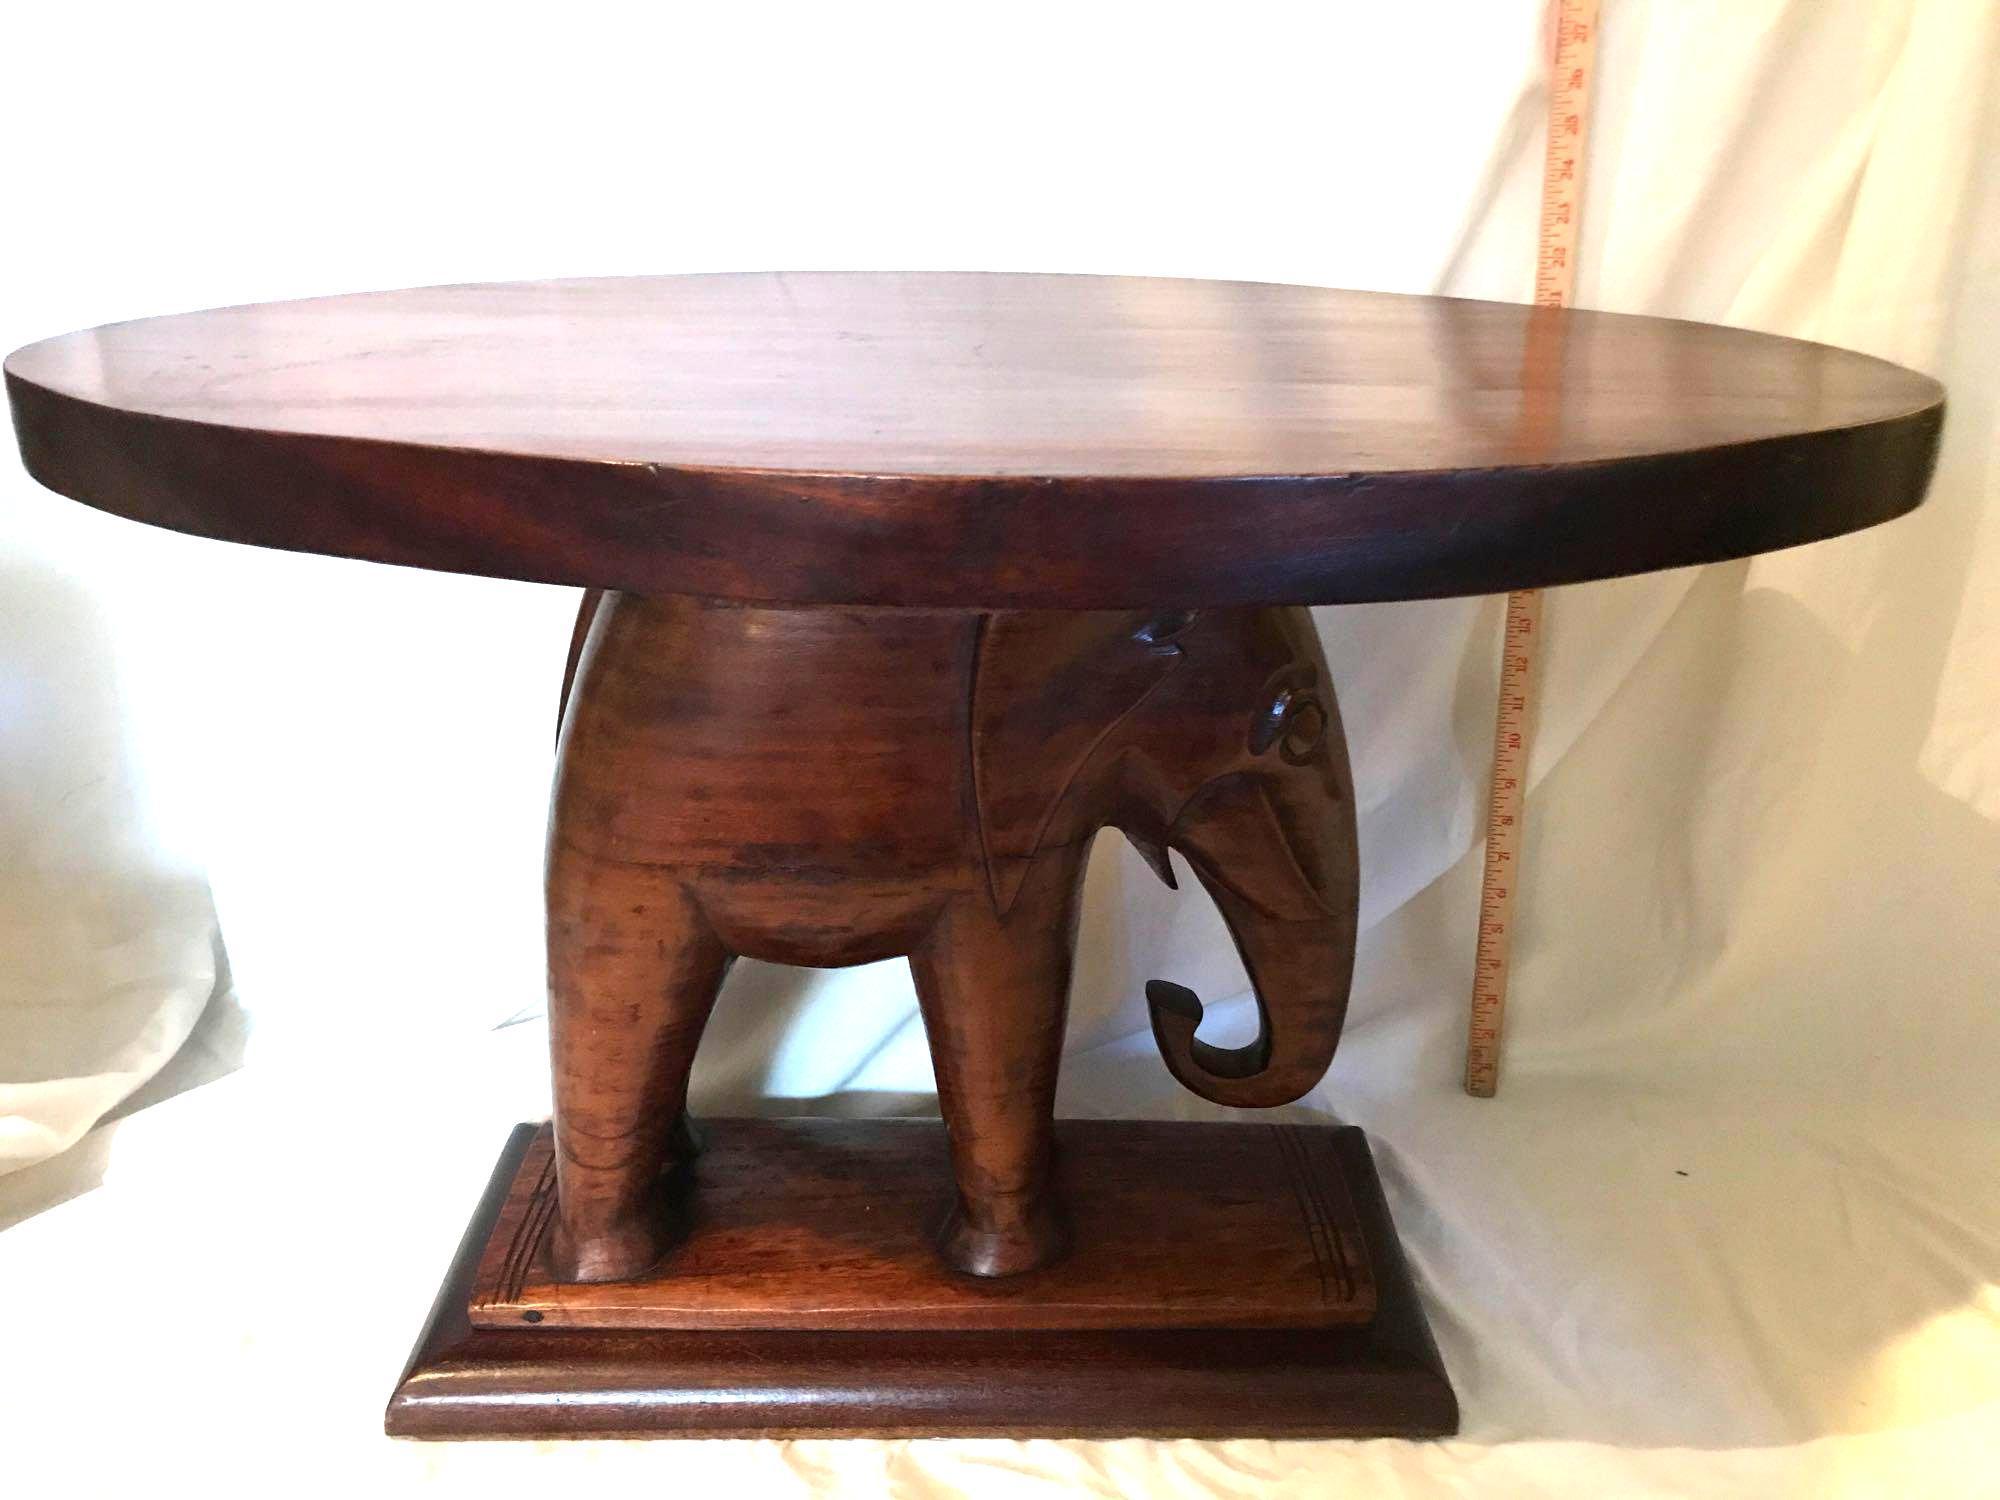 Unique carved Mahogany Elephant based table.